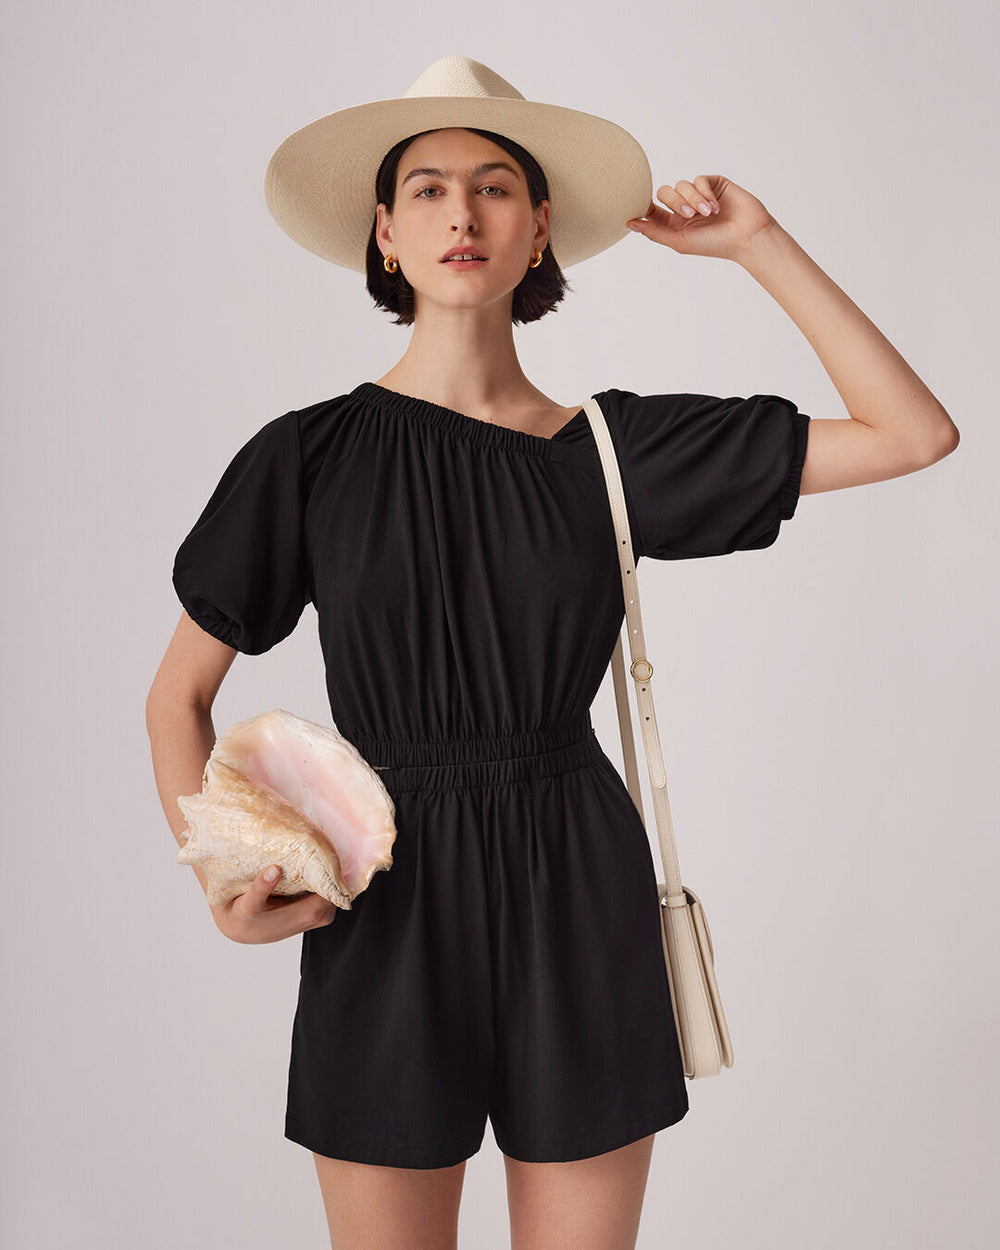 Woman in a hat and romper holding a shell, with a shoulder bag.